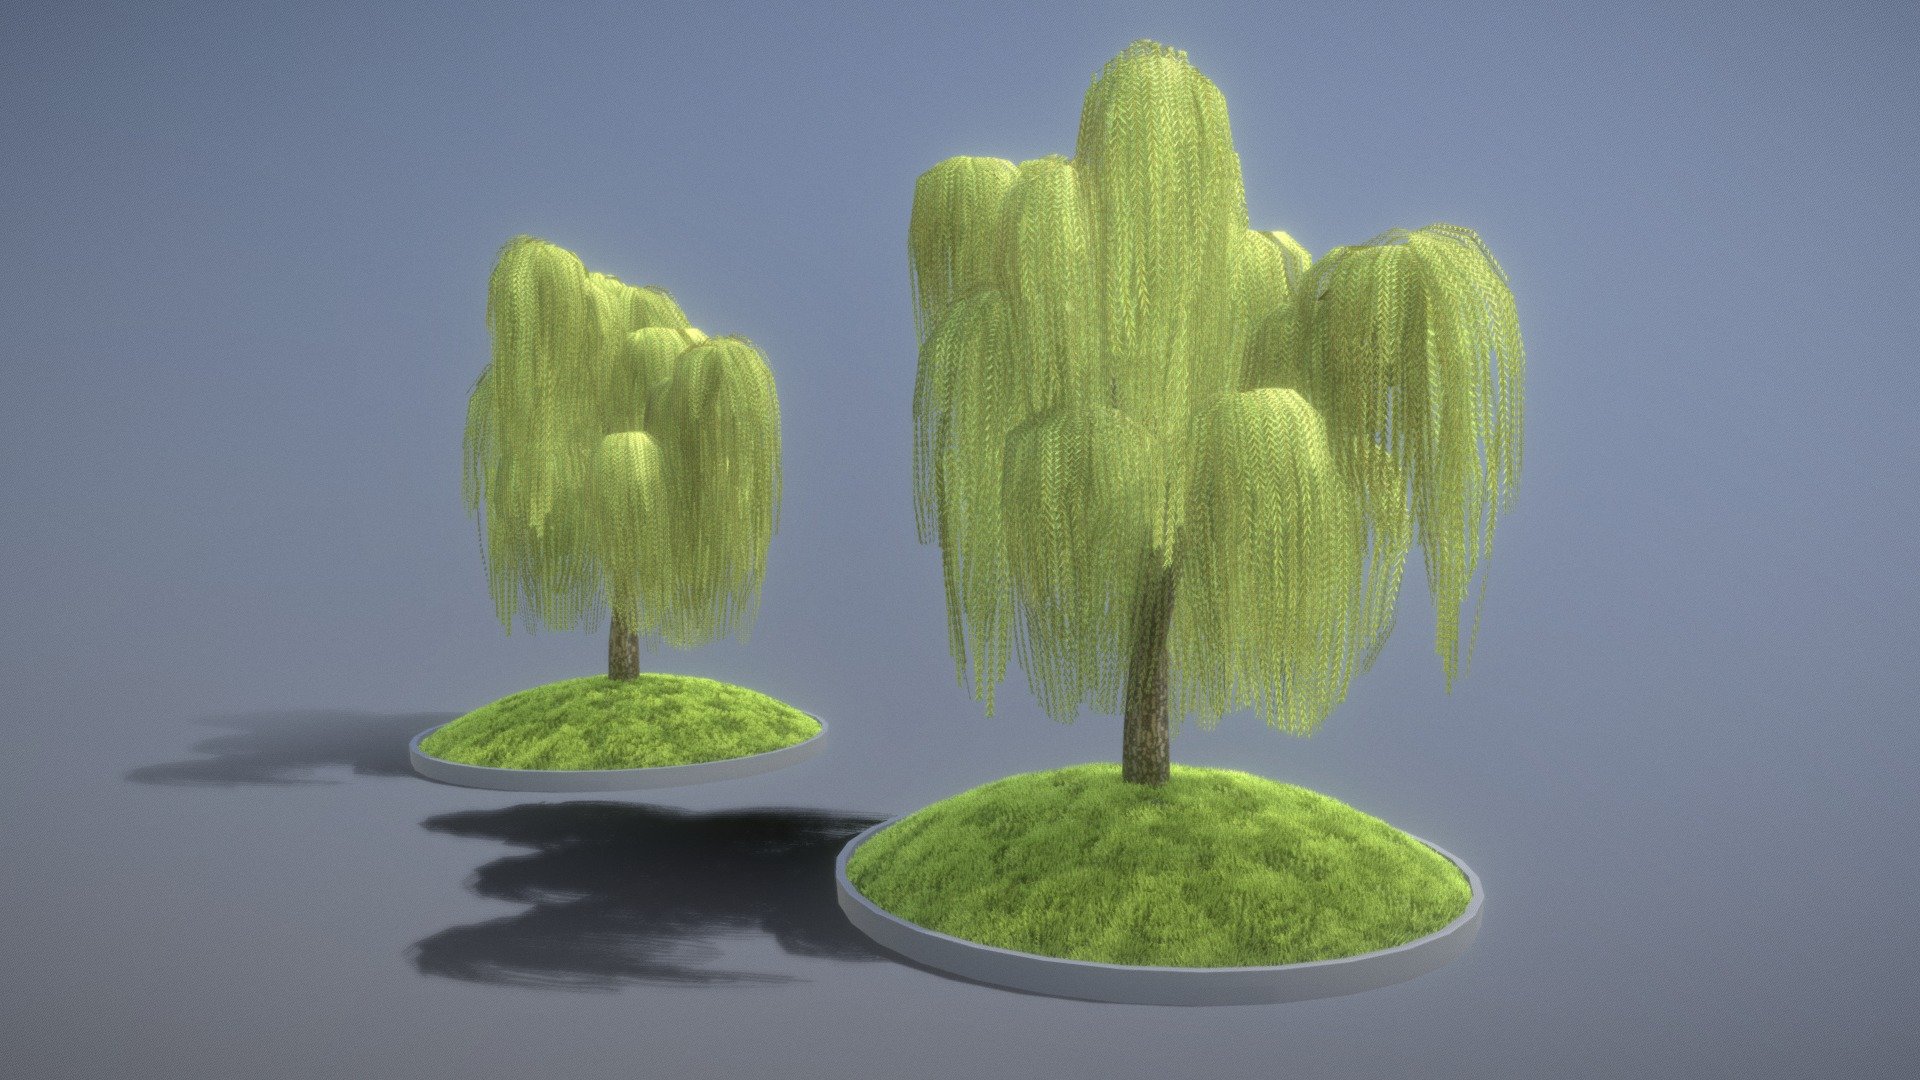 Silver Willow version 5 with and without wind animations for tree and leaves. 

Test in silver willow meadow hill forest.



Silberweide Version 5 mit und ohne Windanimationen für Baum und Blätter. 

Test im Silberweidenwiesehügelwald.










Object Name - Silver_Willow_5_19m 

Object Dimensions -  14.857m x 18.640m x 19.277m






Vertices = 3966

Edges = 9322

Polygons = 5552






Lawn Fields - Package
 - Low-Poly Silver Willow Version 5 - Buy Royalty Free 3D model by VIS-All-3D (@VIS-All) 3d model